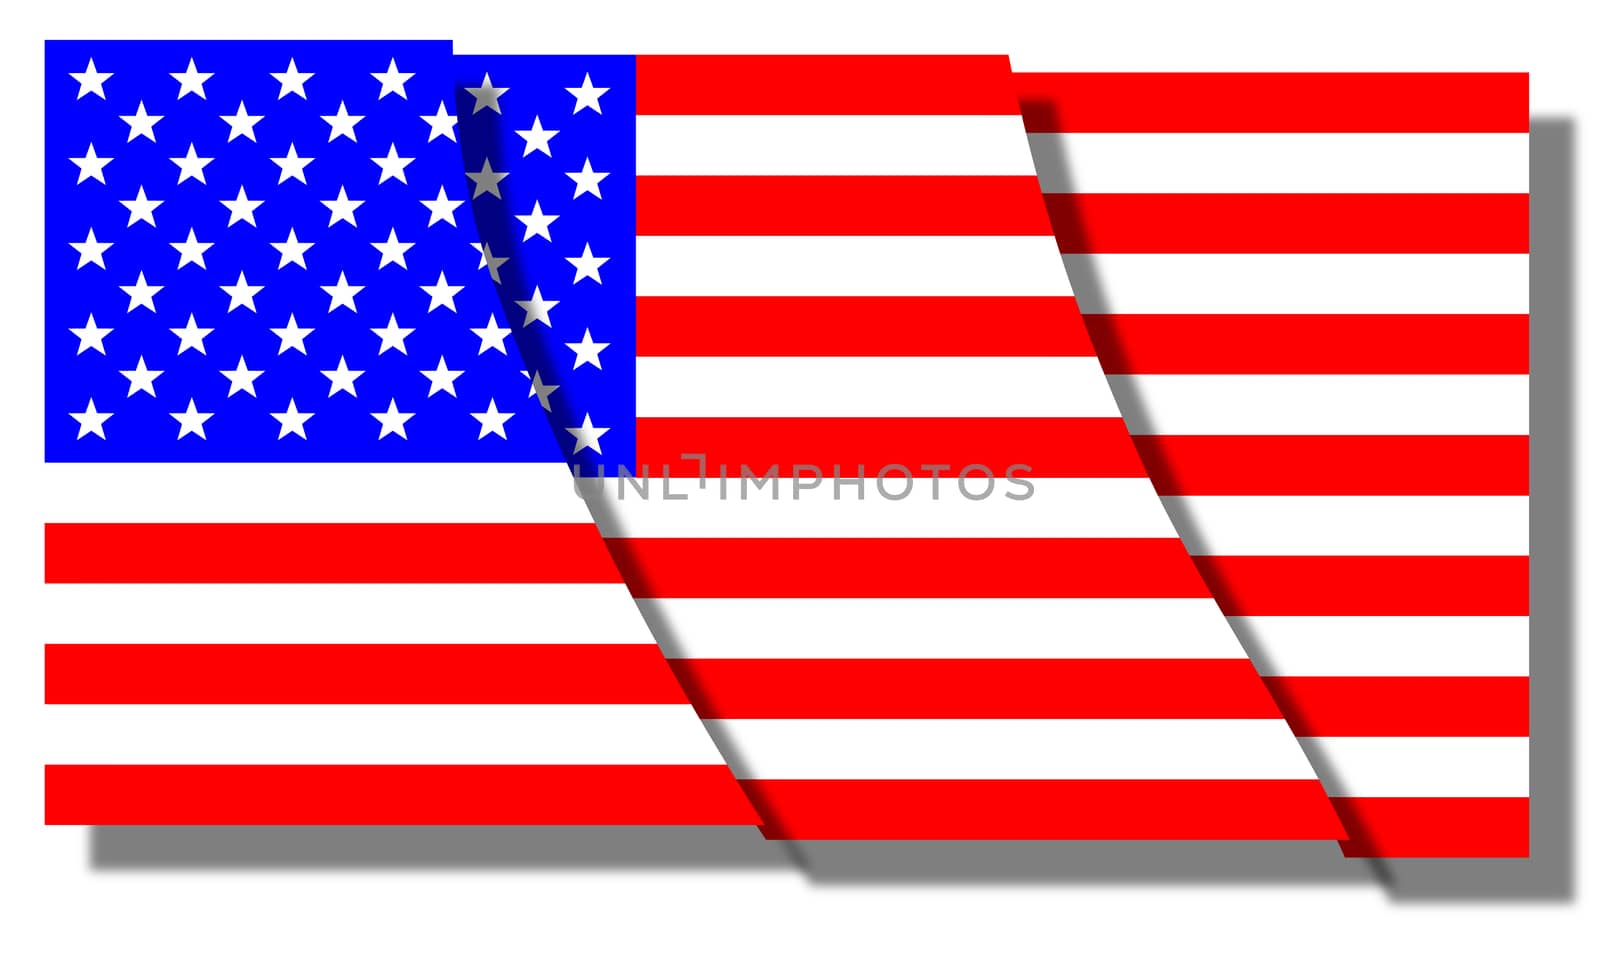 The 'Stars and Stripes' flag of the United States of America segmented into sections over white